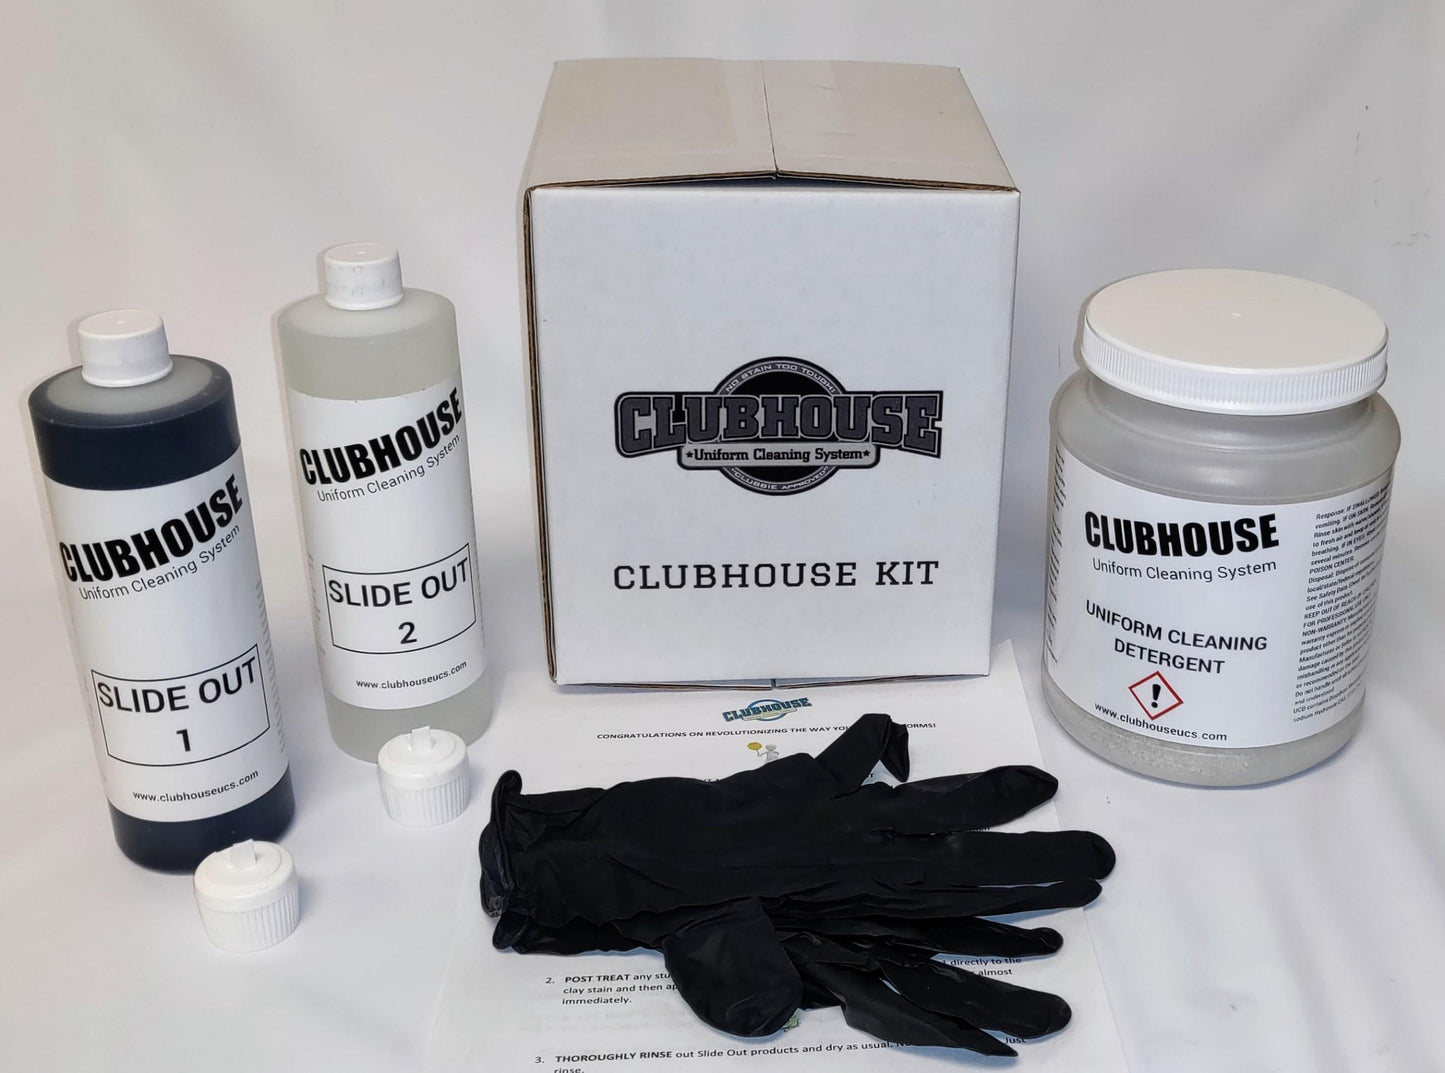 CLUBHOUSE KIT